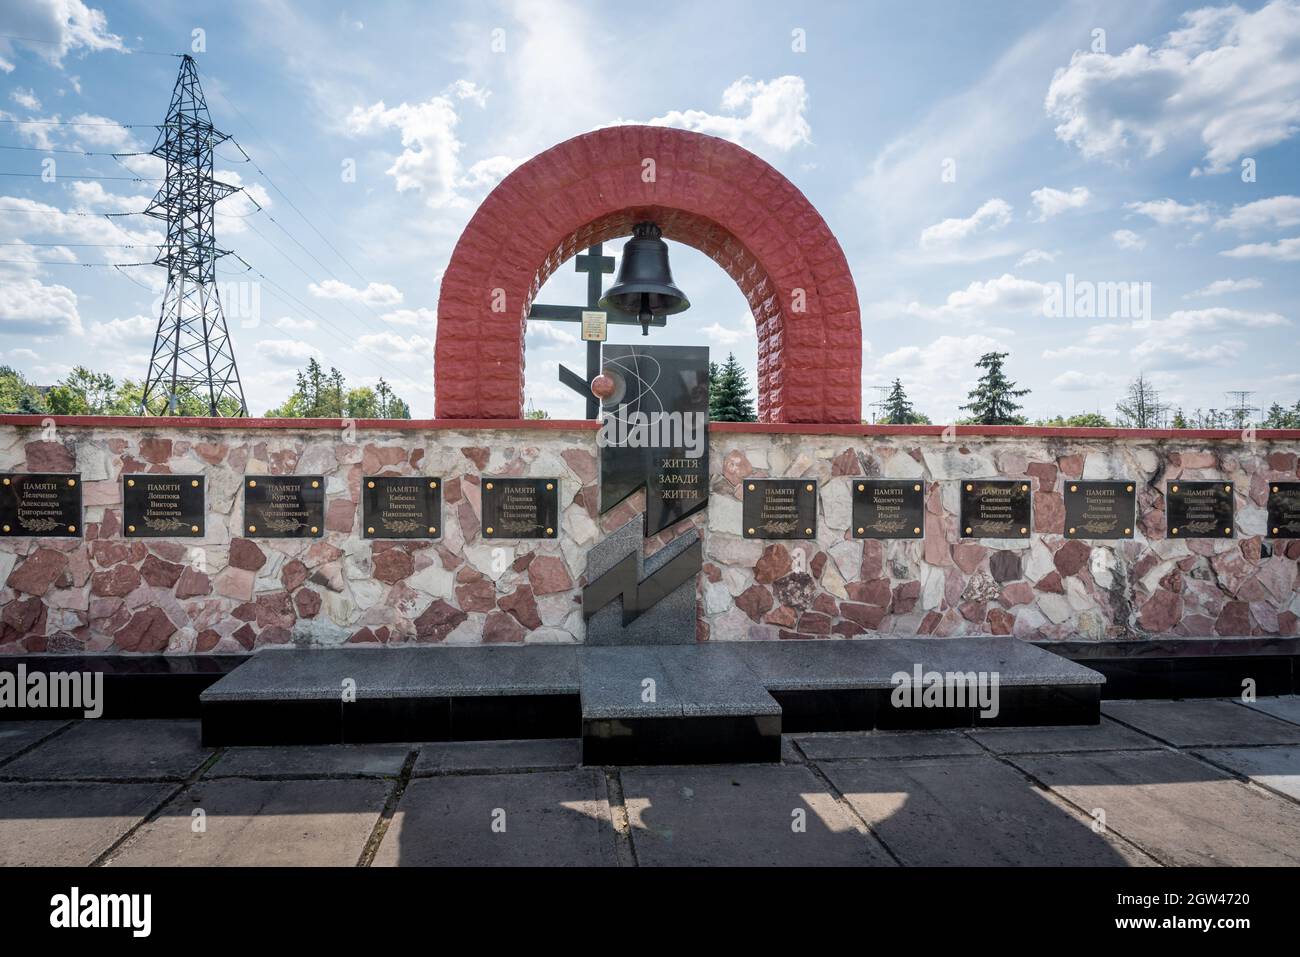 Memorial Life for Life at Chernobyl Nuclear Power Plant - monument wall with victim names of Chernobyl disaster - Chernobyl Exclusion Zone, Ukraine Stock Photo